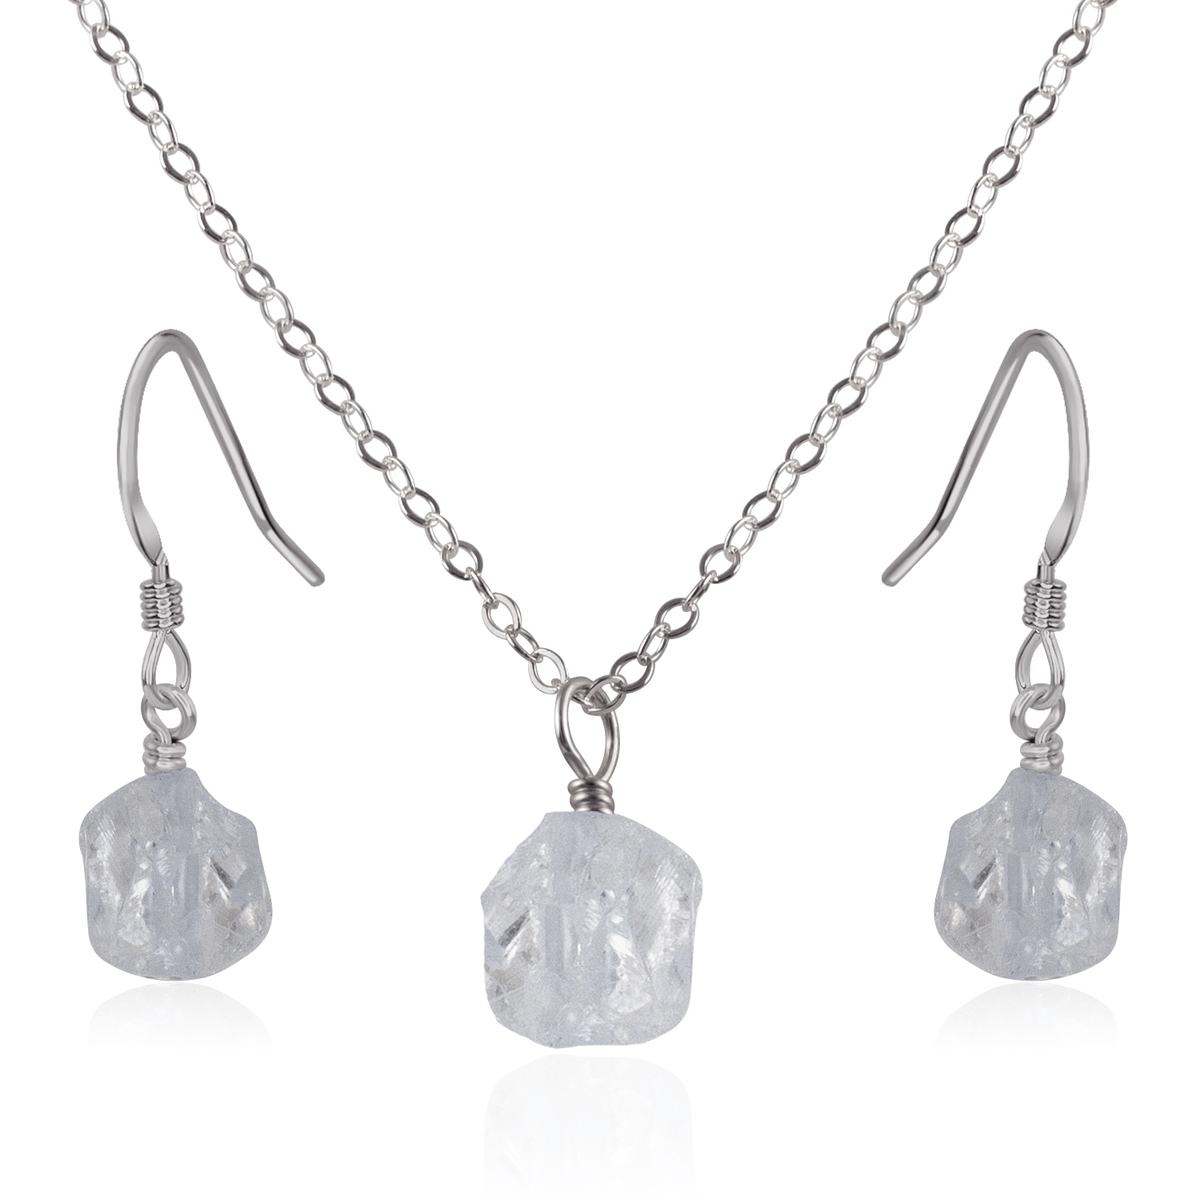 Raw Crystal Quartz Crystal Earrings & Necklace Set - Raw Crystal Quartz Crystal Earrings & Necklace Set - Stainless Steel / Cable - Luna Tide Handmade Crystal Jewellery